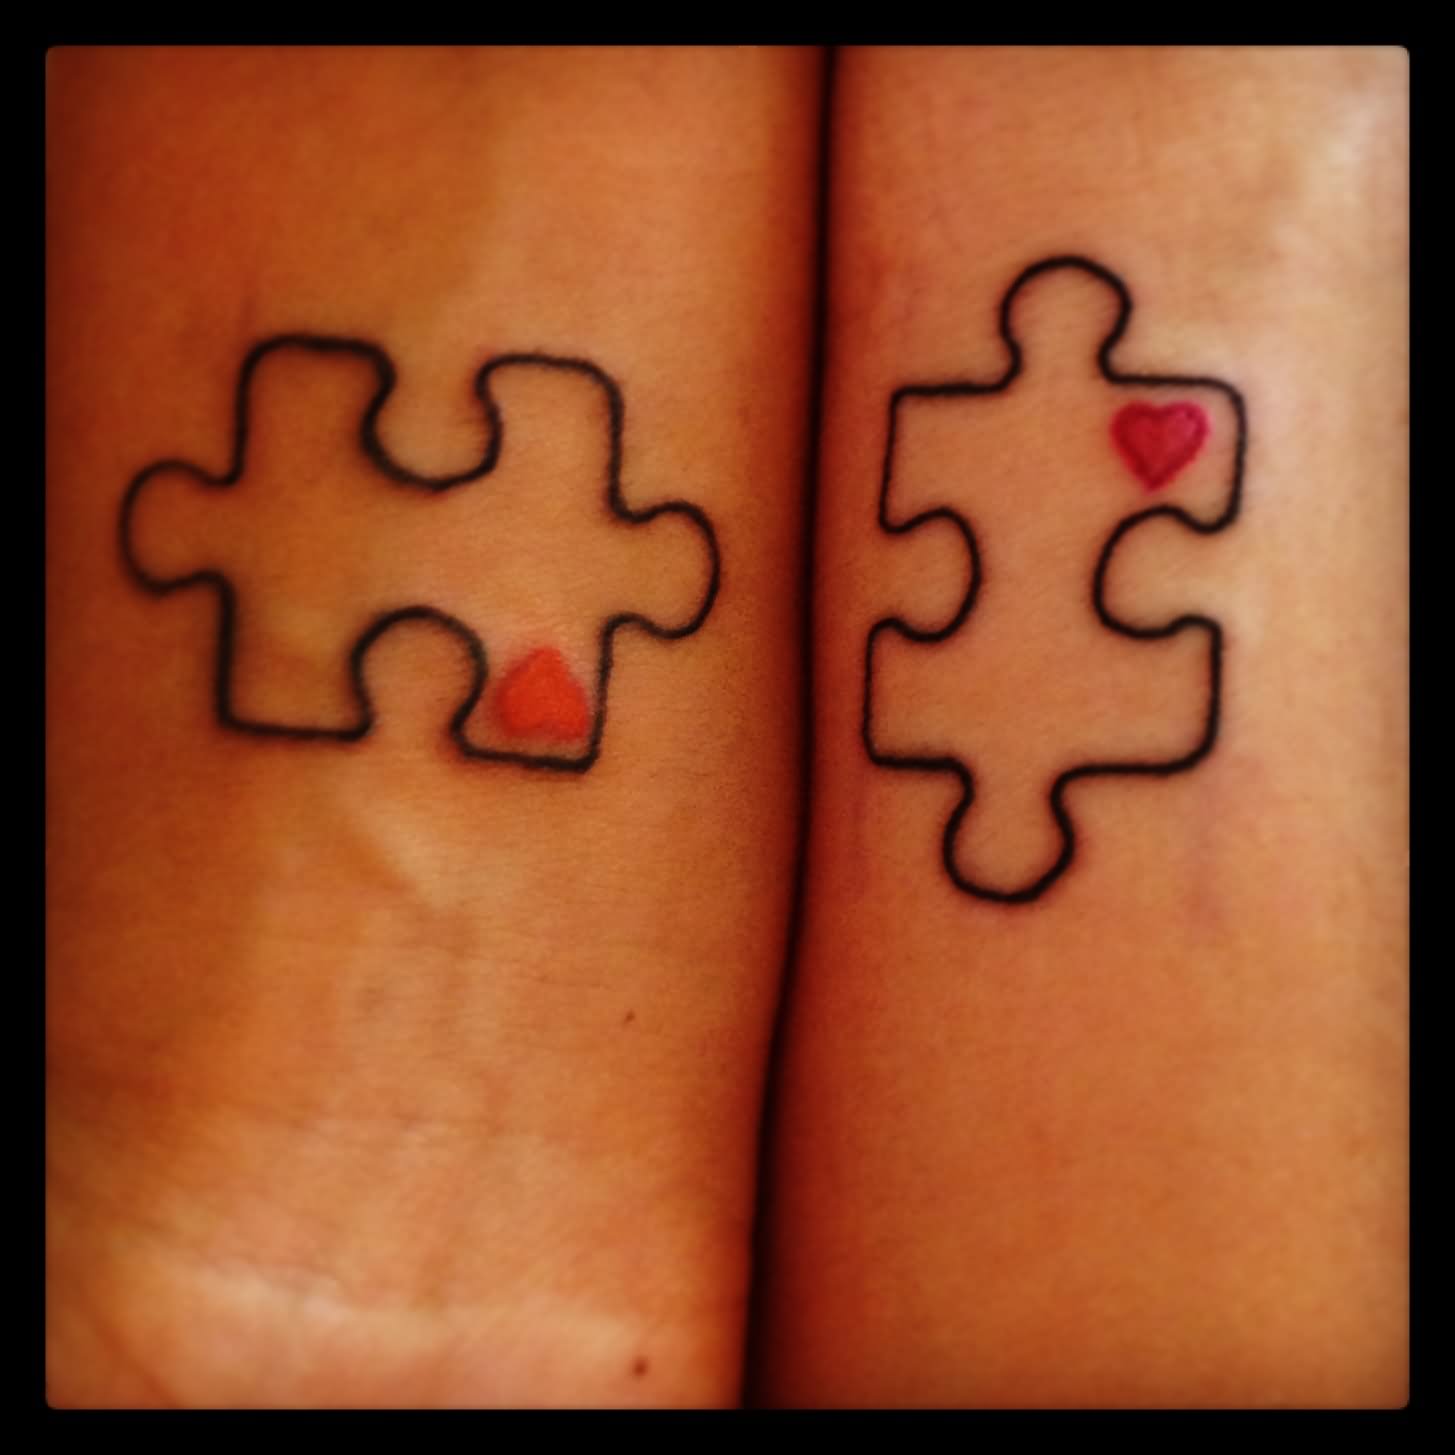 Red Tiny Heart In Matching Puzzle Tattoos On Both Wrists